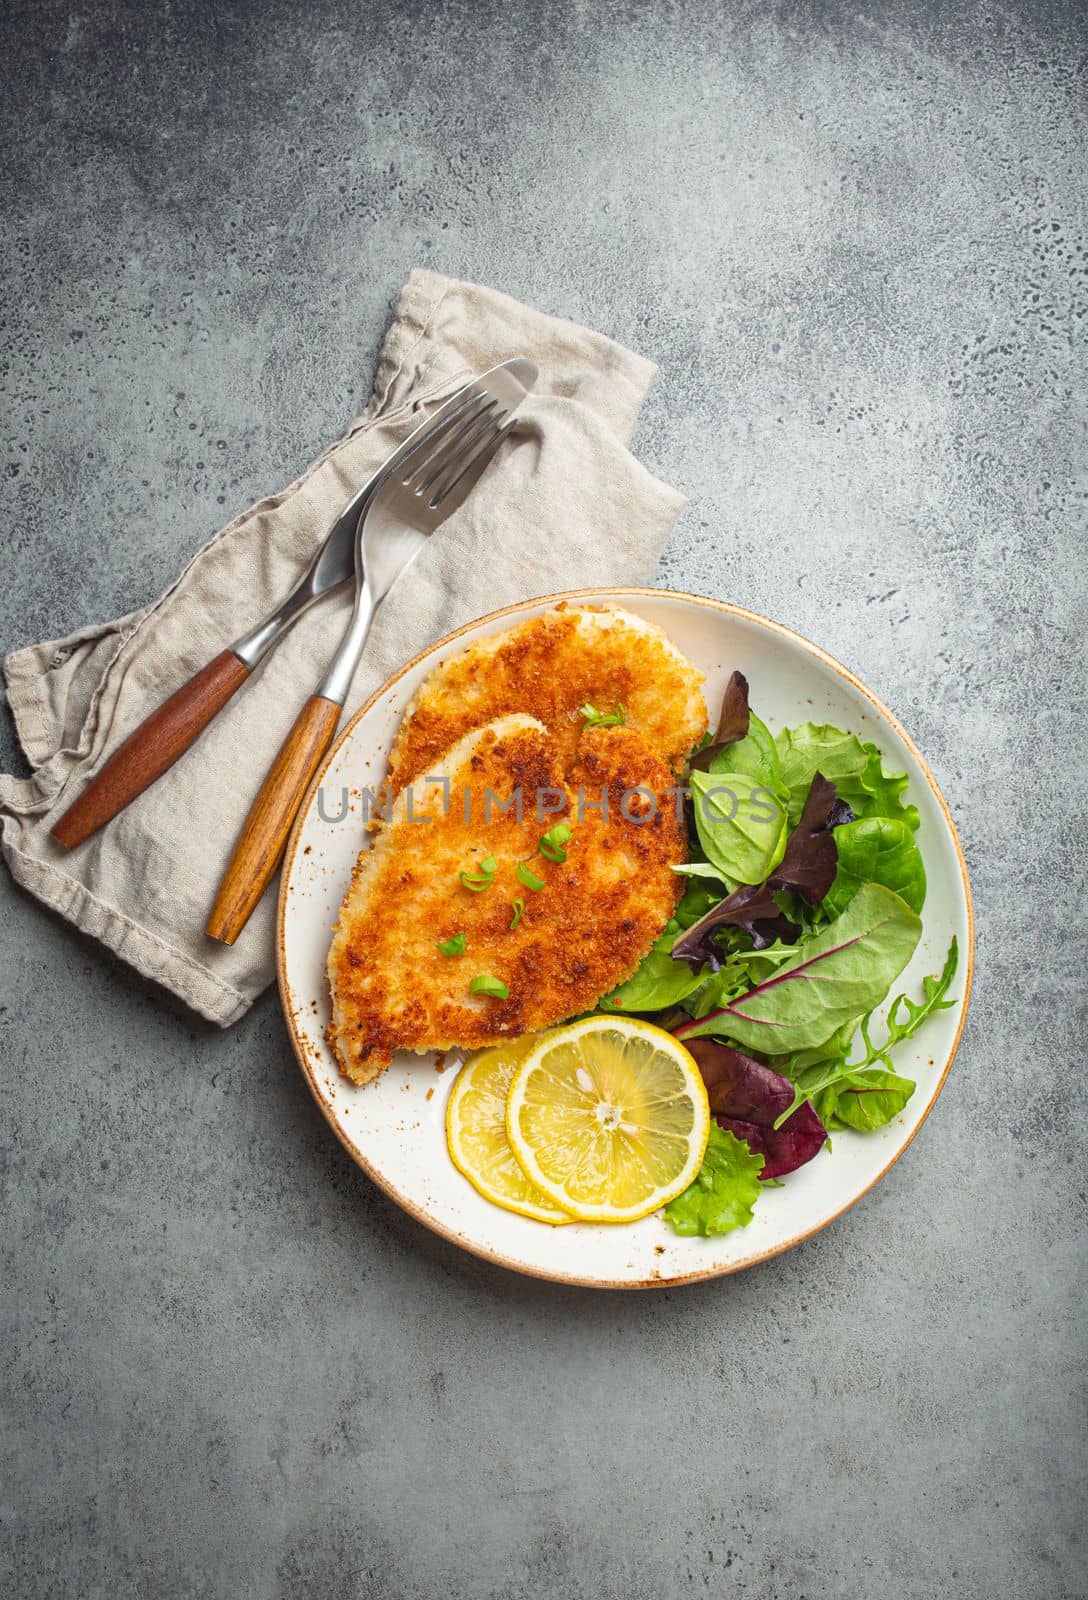 Crispy panko breaded fried chicken fillet with green salad and lemon on plate with cutlery on gray rustic concrete background table from above. Japanese style deep fried coated chicken breasts . by its_al_dente